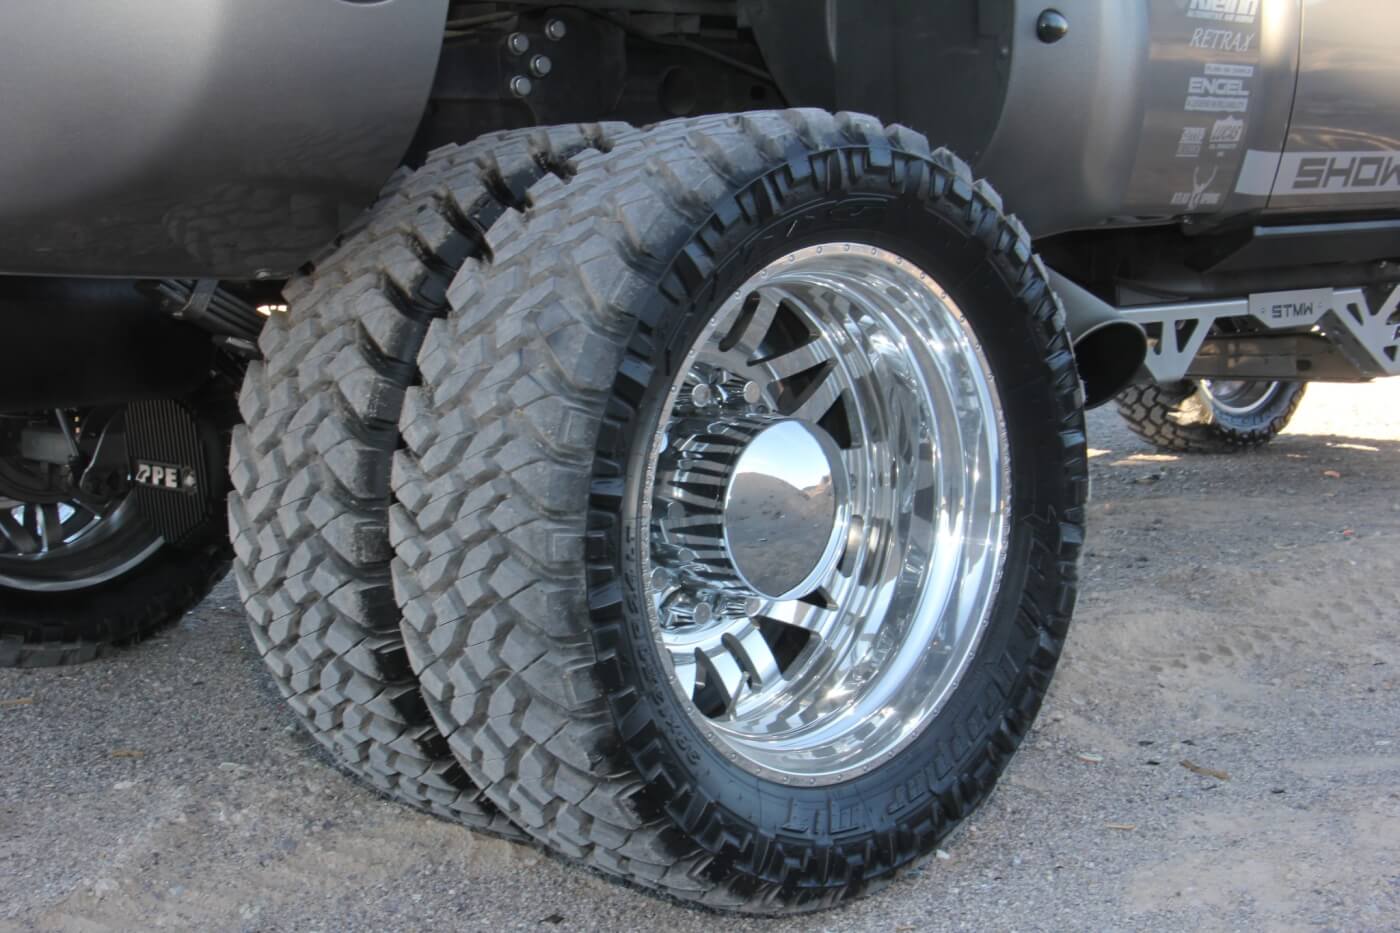 The tires of choice are Nitto Trail Grapplers, size 38x13.50R24. These are mounted on American Force 24-inch Scope wheels. Six wheels are required to roll down the road in style on this dually. 